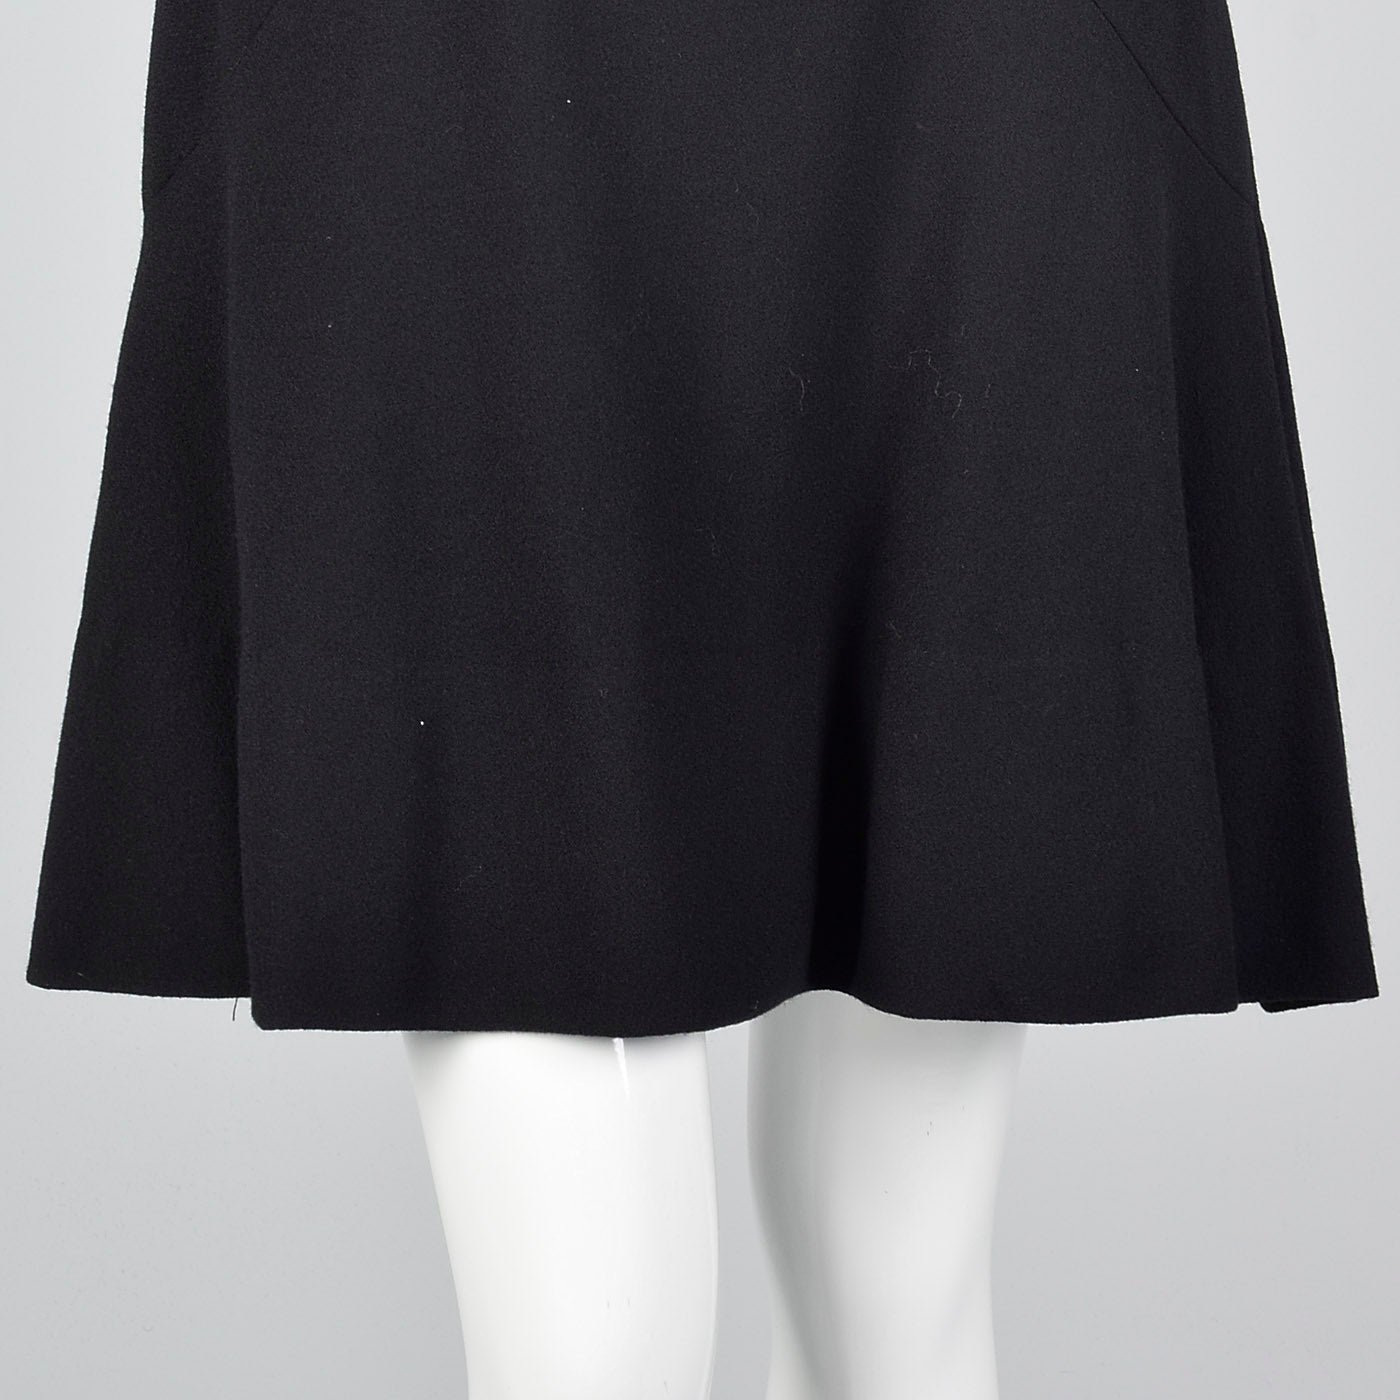 1950s Adele Simpson Black Dress with Button Up Back